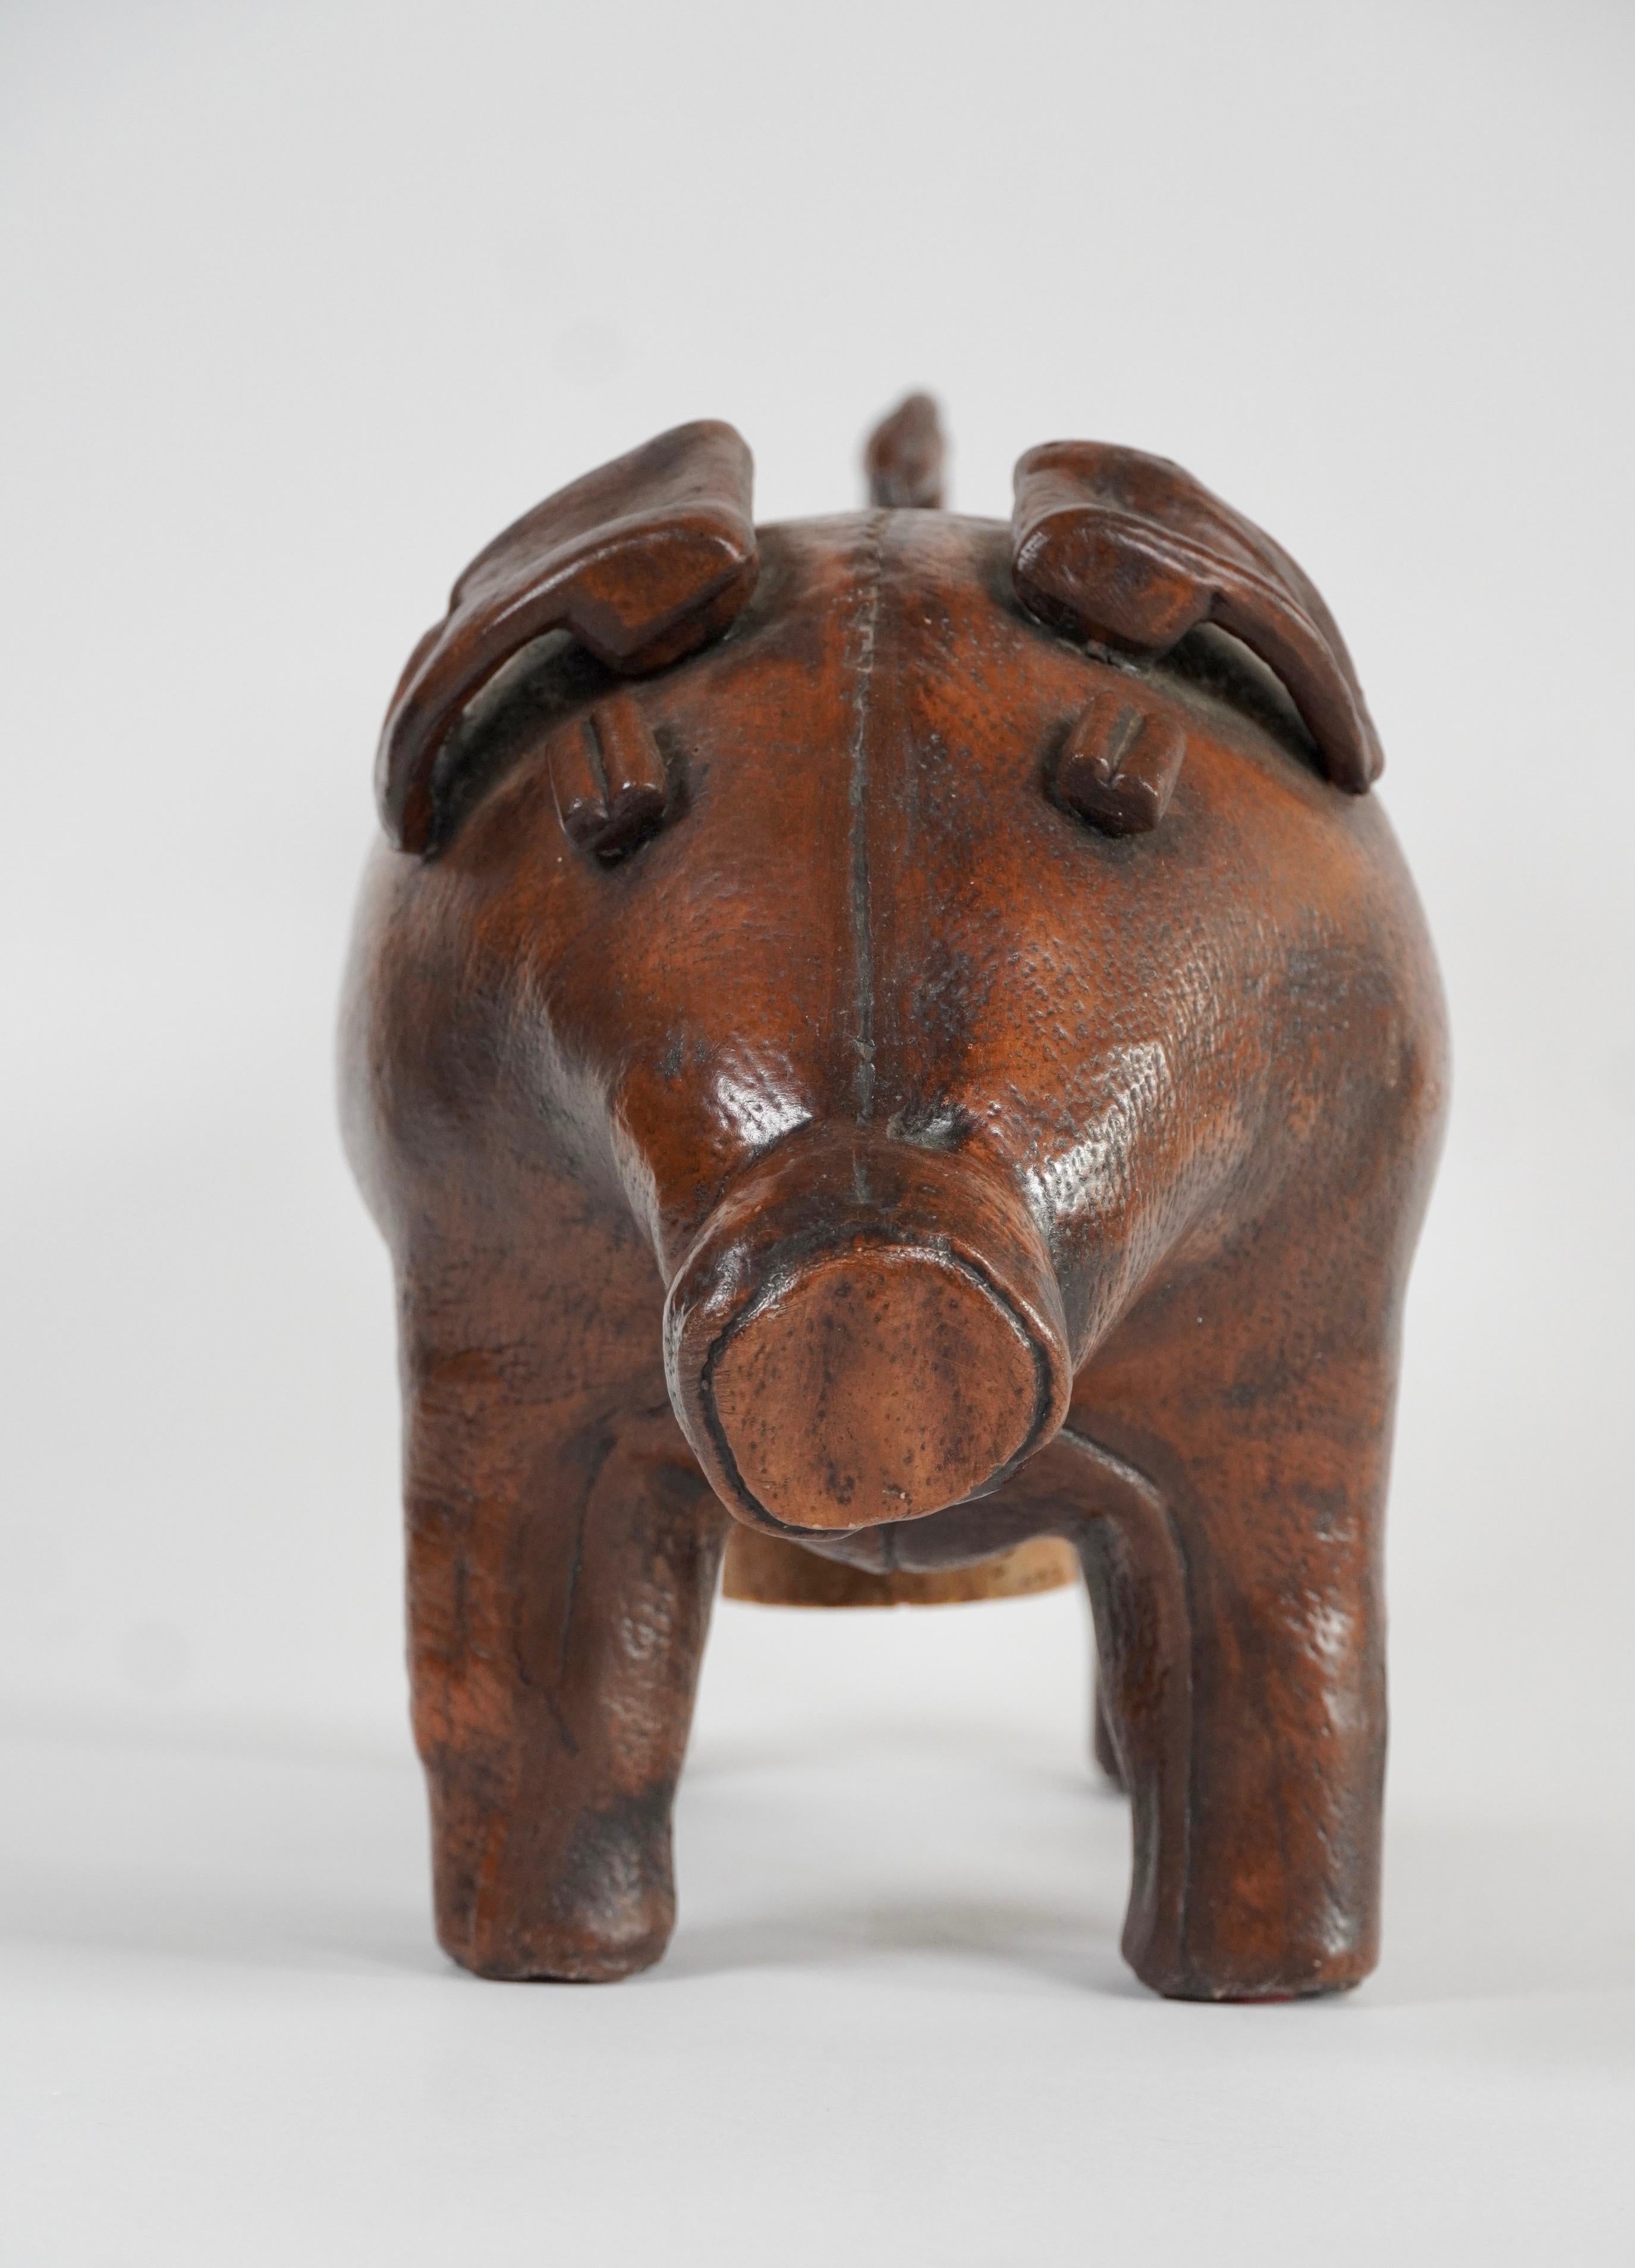 Other Realistic Ceramic Piggy Bank in the Style of an Omersa Leather Pig